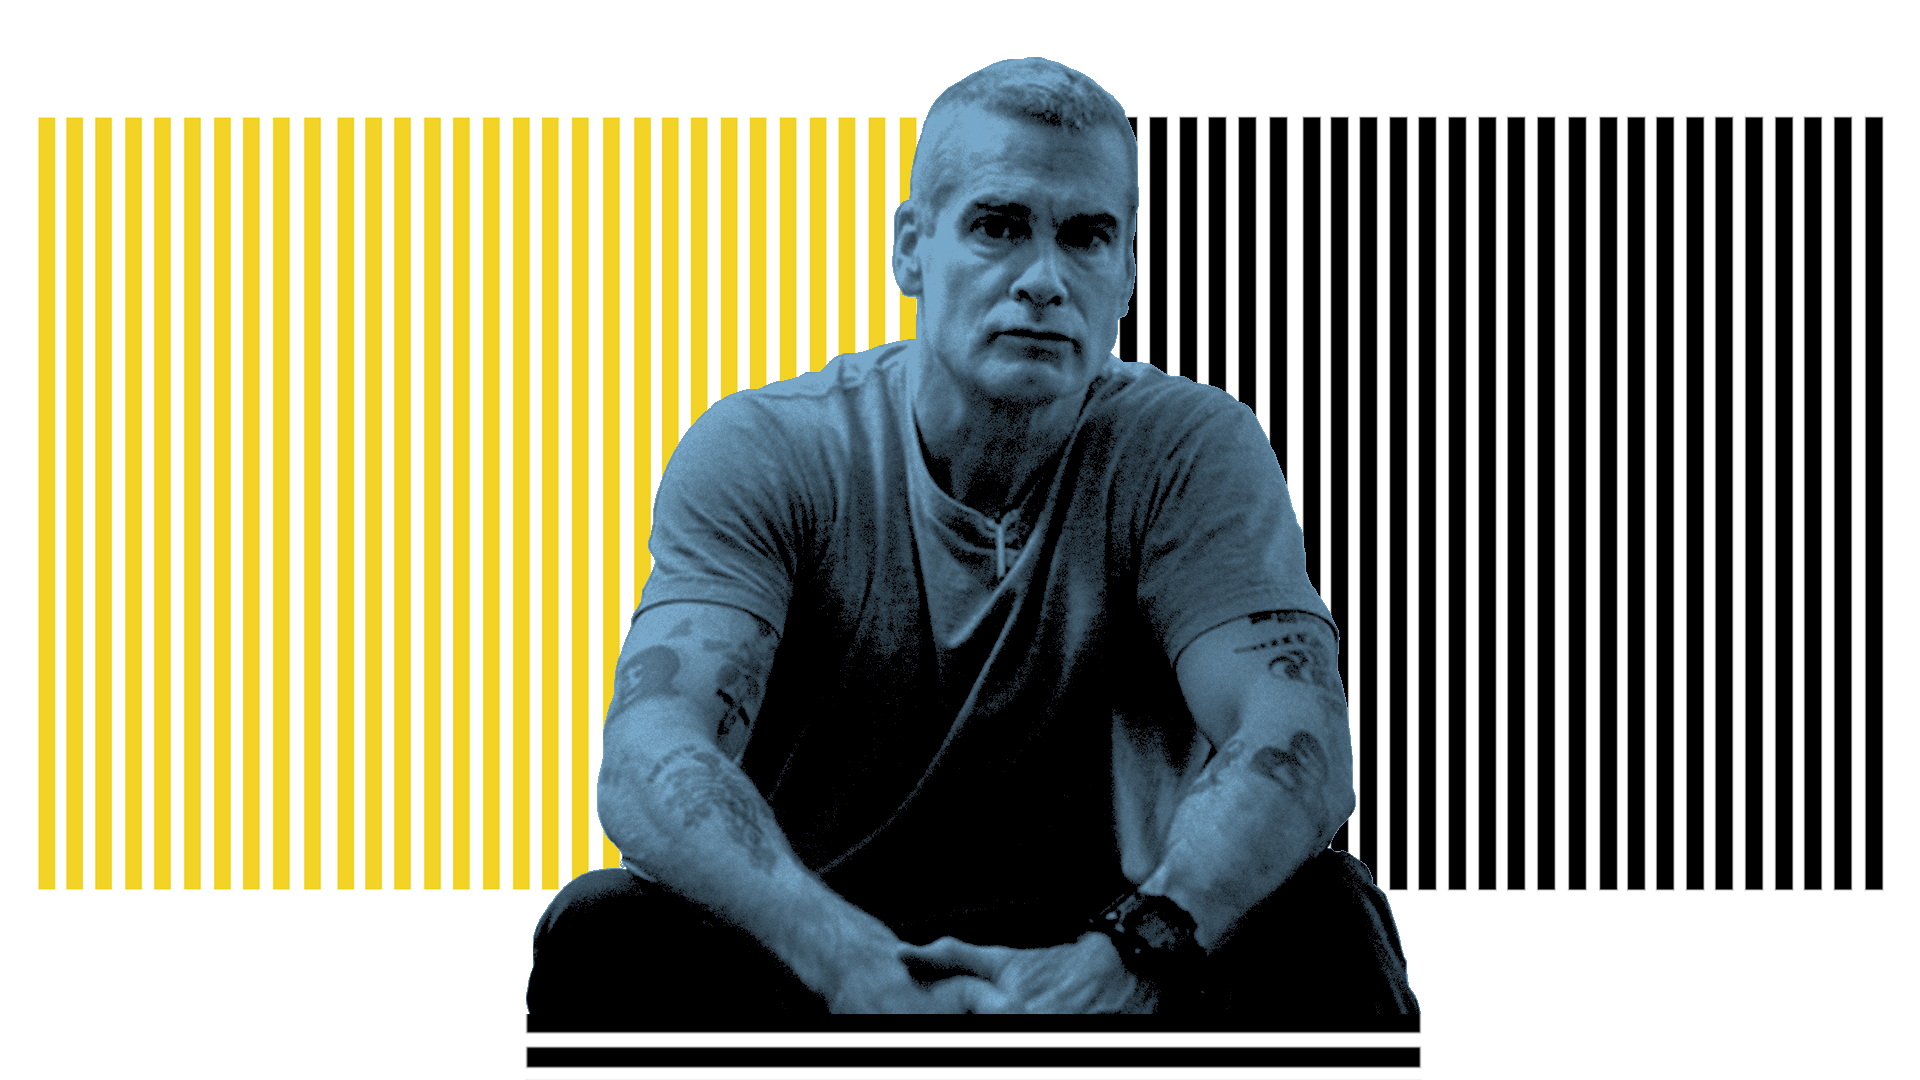 Stylized image of henry rollins on a vertical-striped background